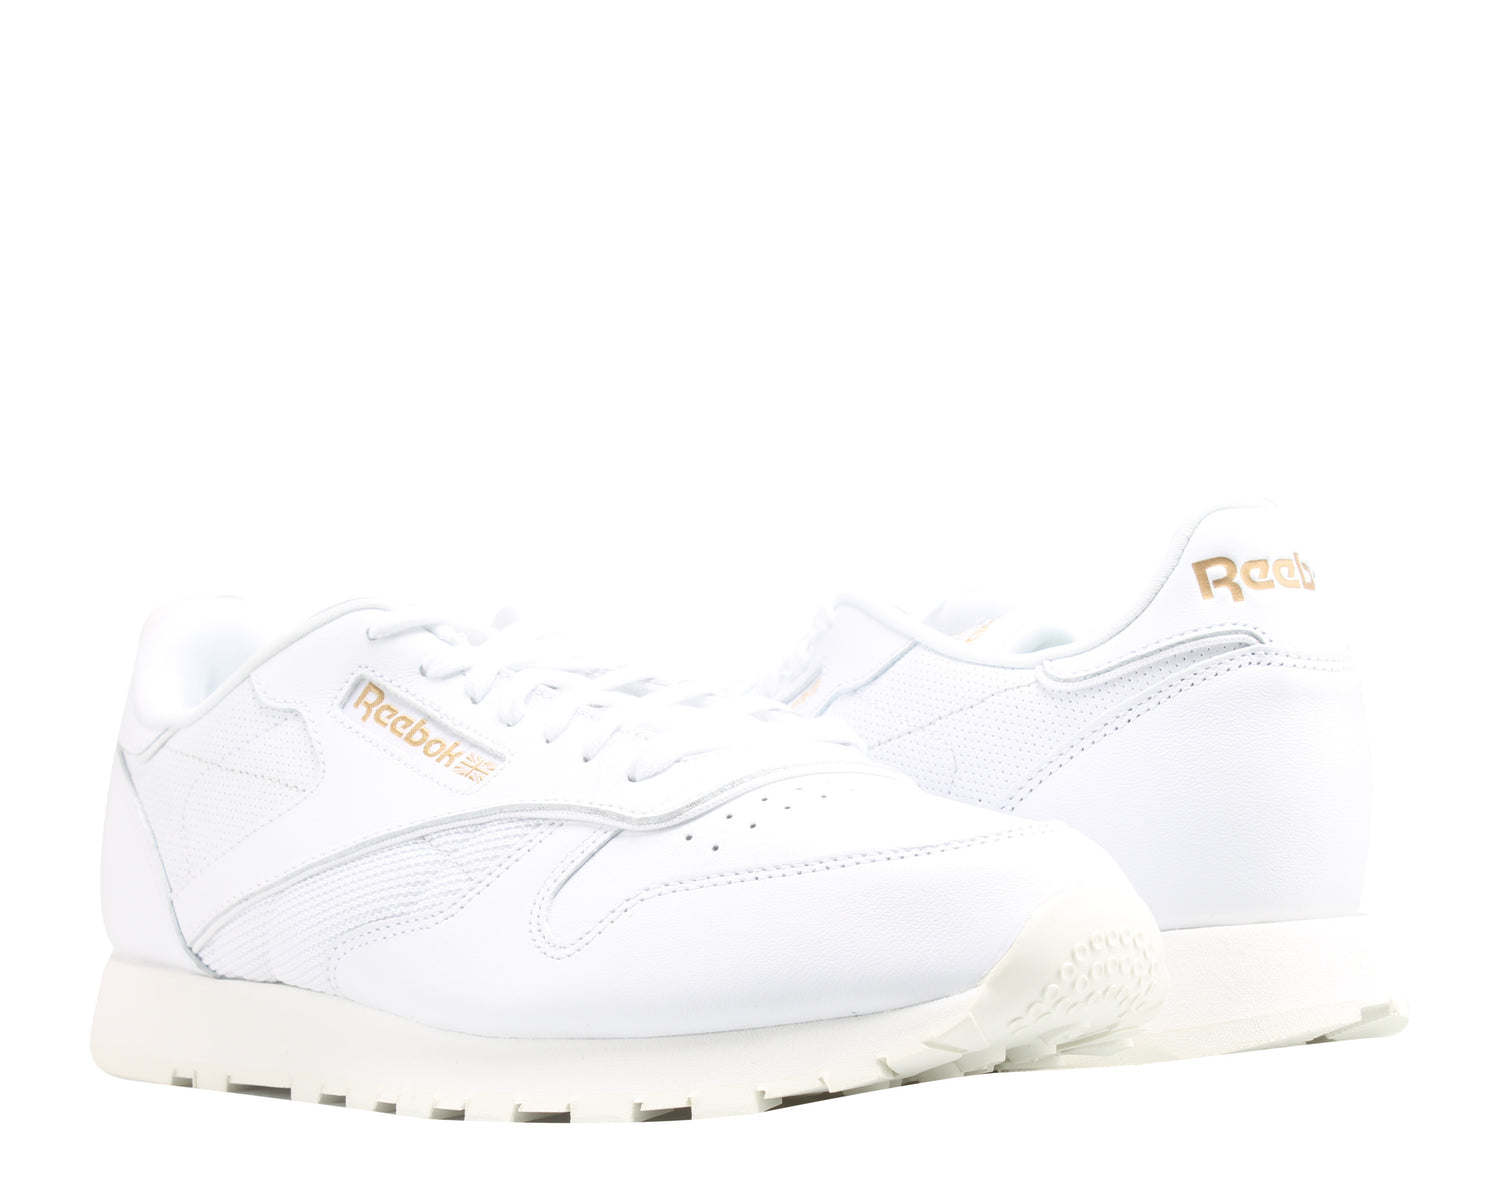 Reebok Classic Leather ALR Men's Running Shoes